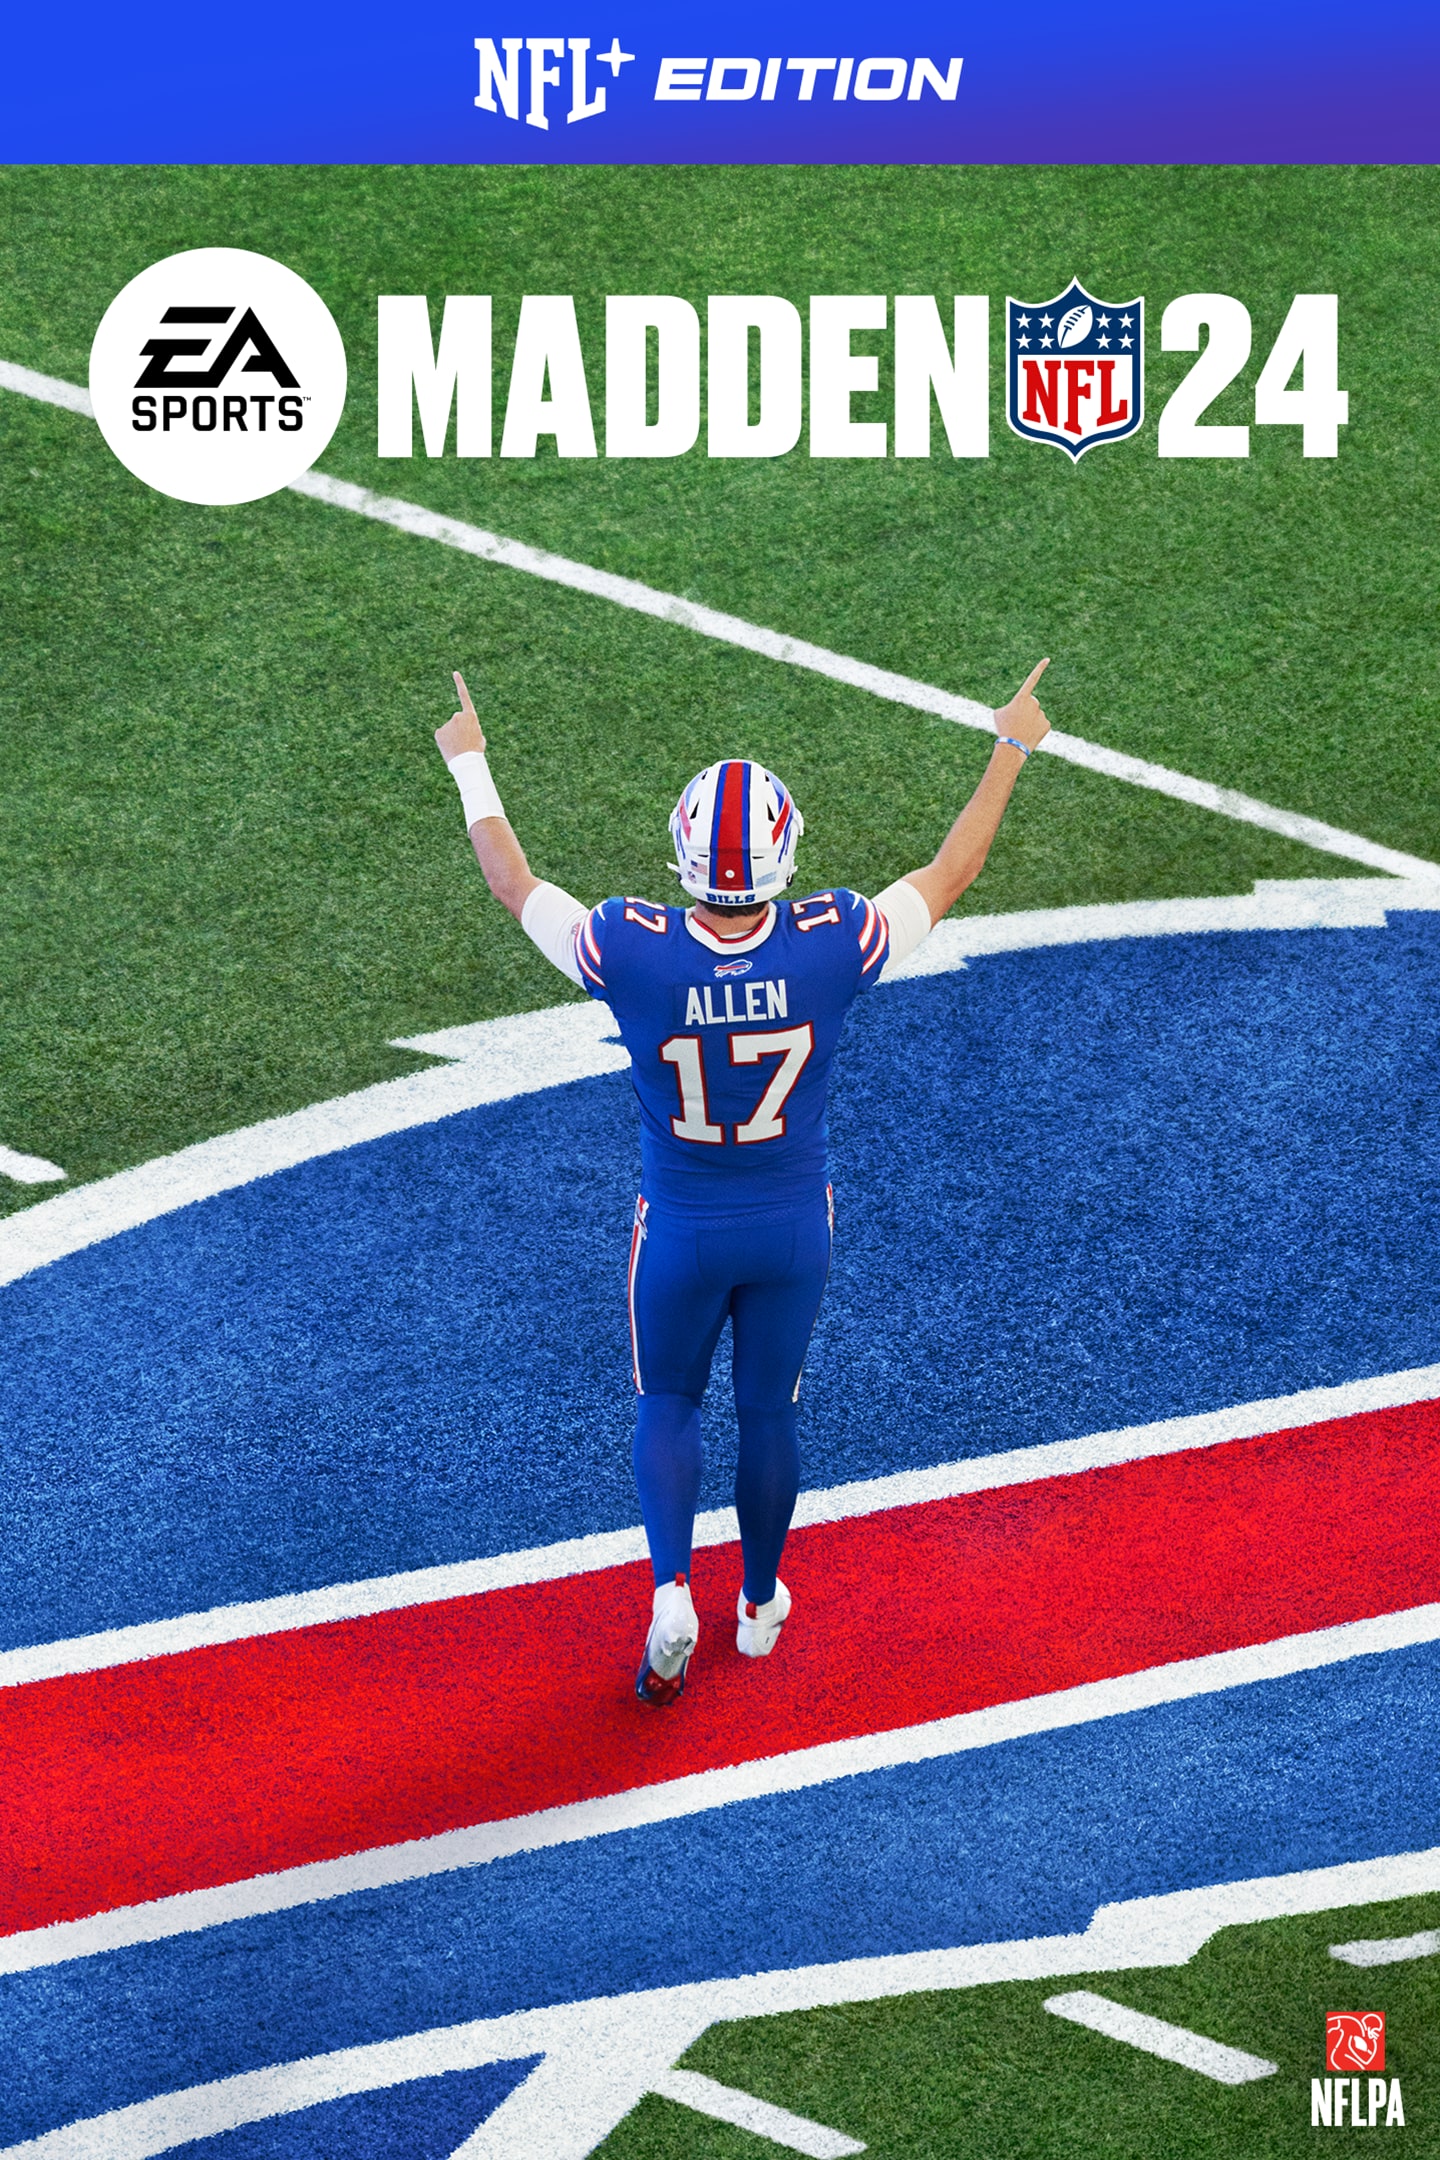 Madden NFL 24 NFL+ Edition PS5™ and PS4™